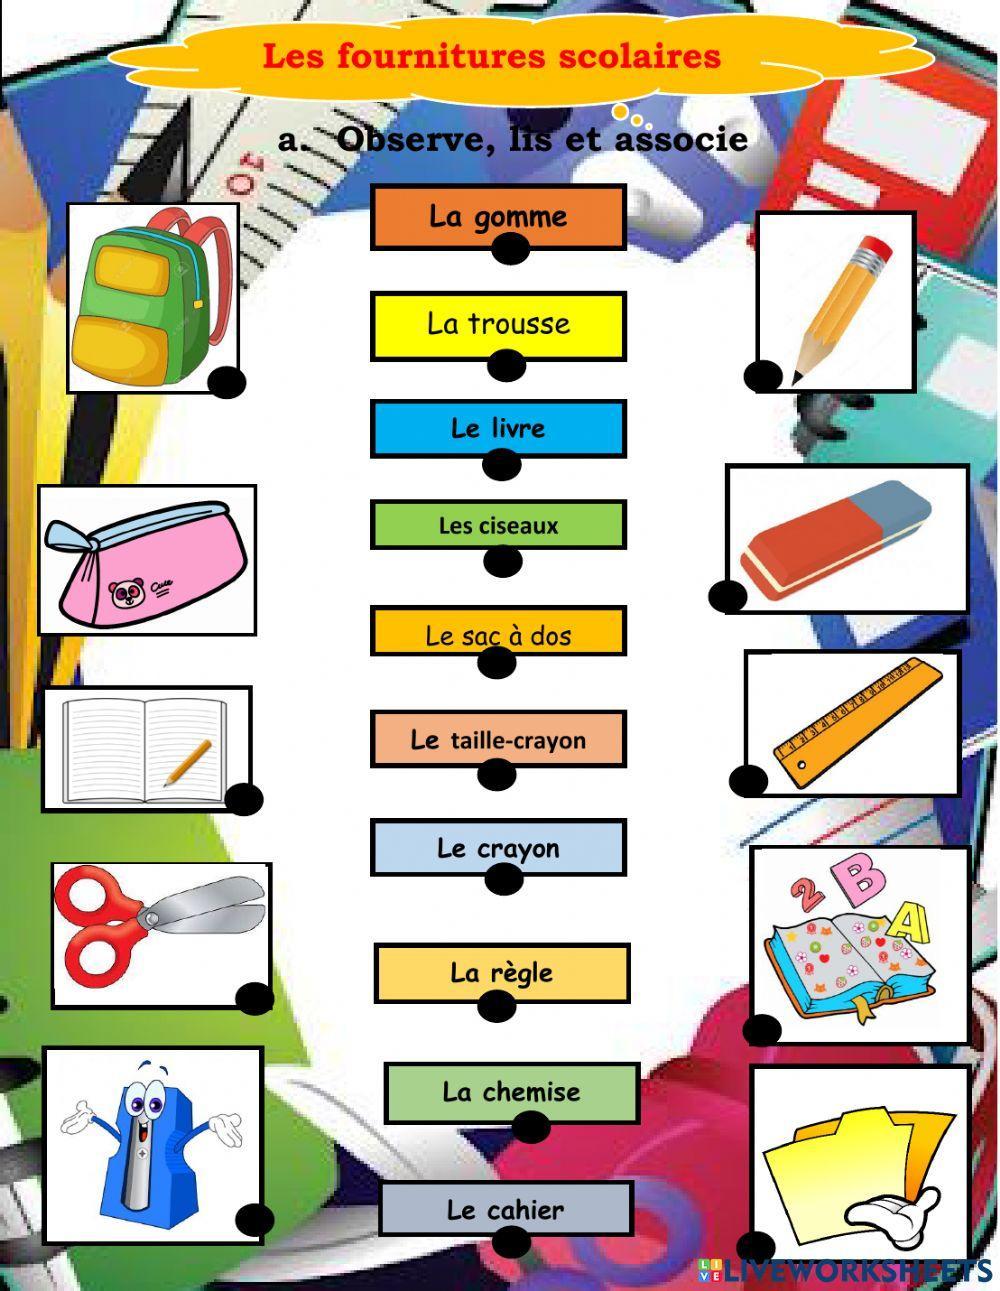 Les fournitures scolaires free worksheet